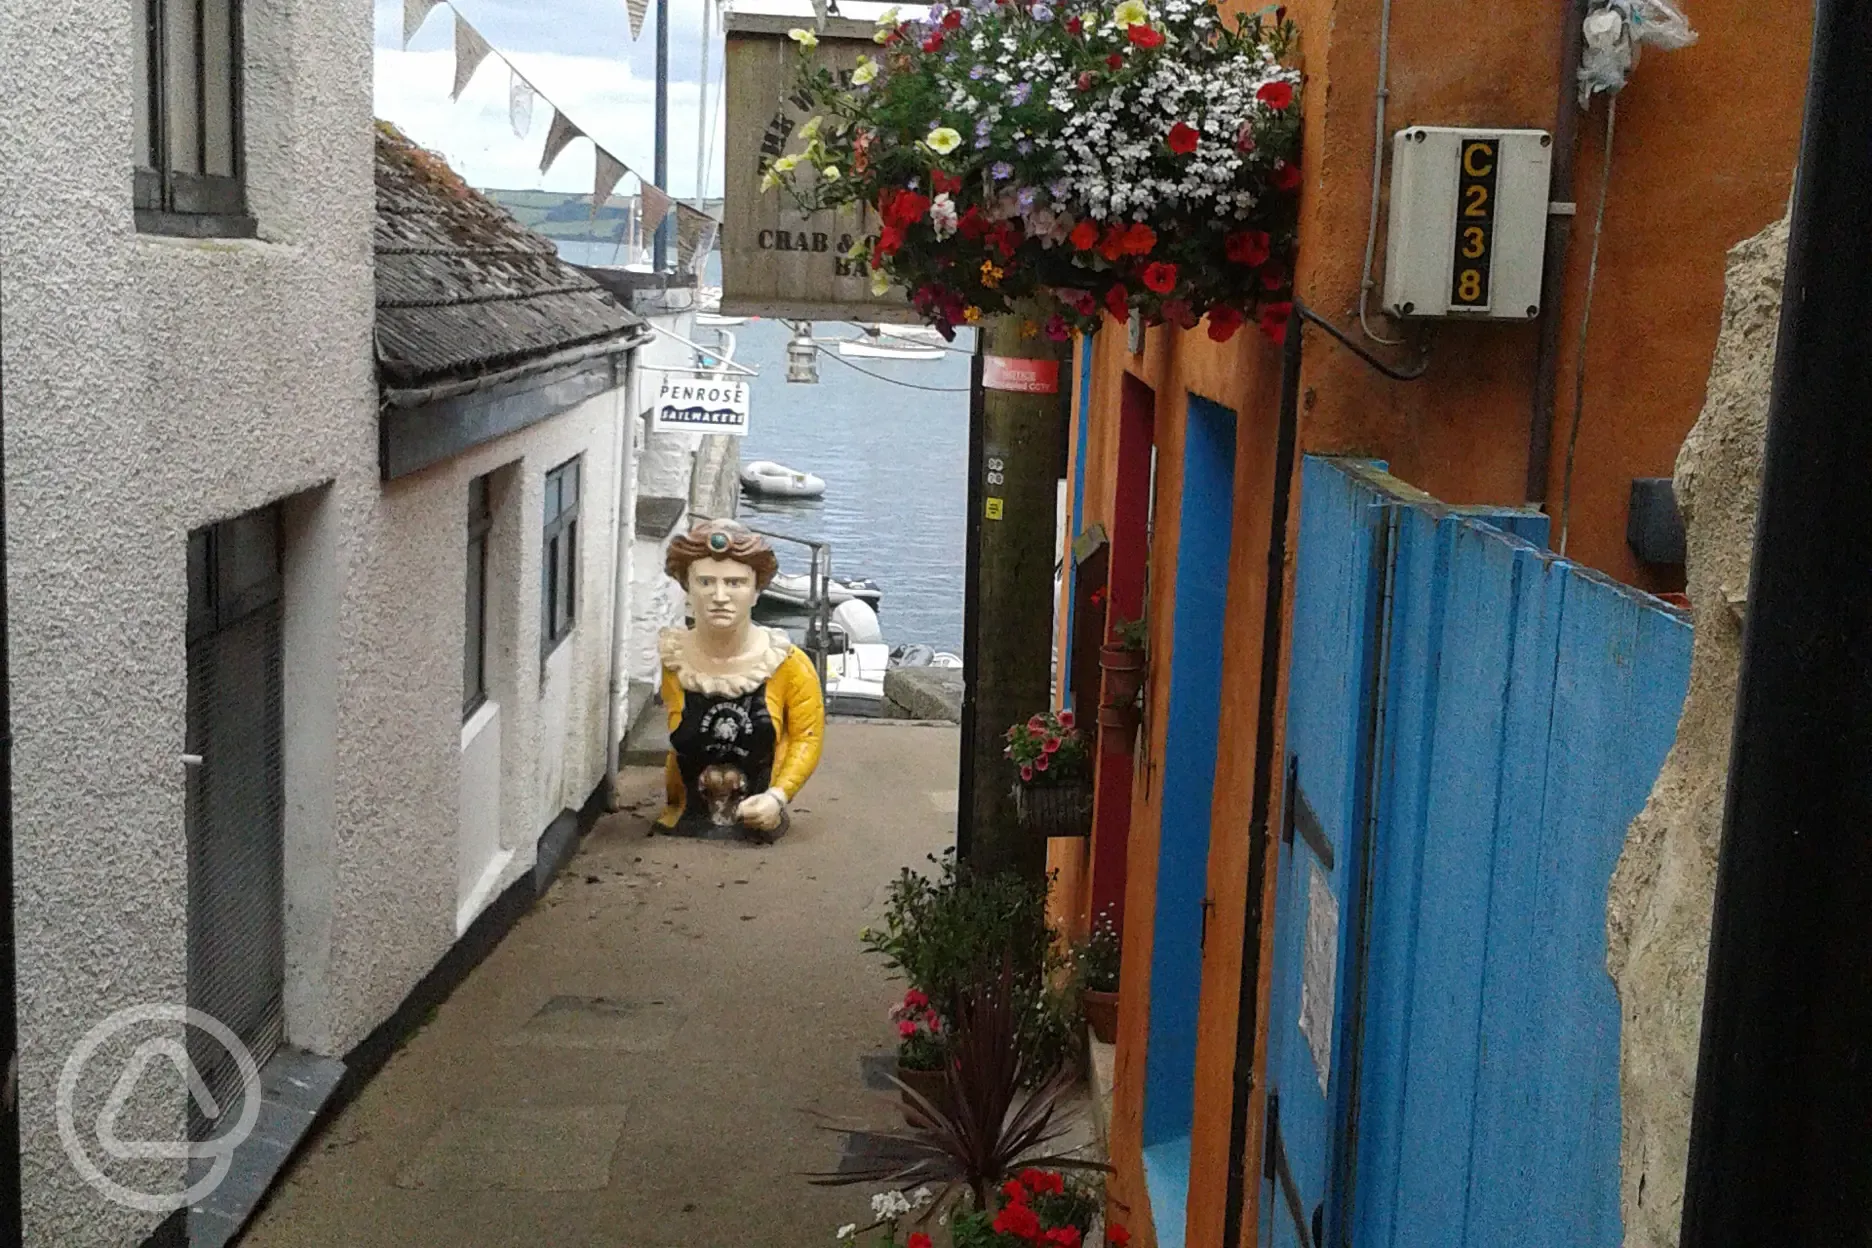 A side street in Falmouth